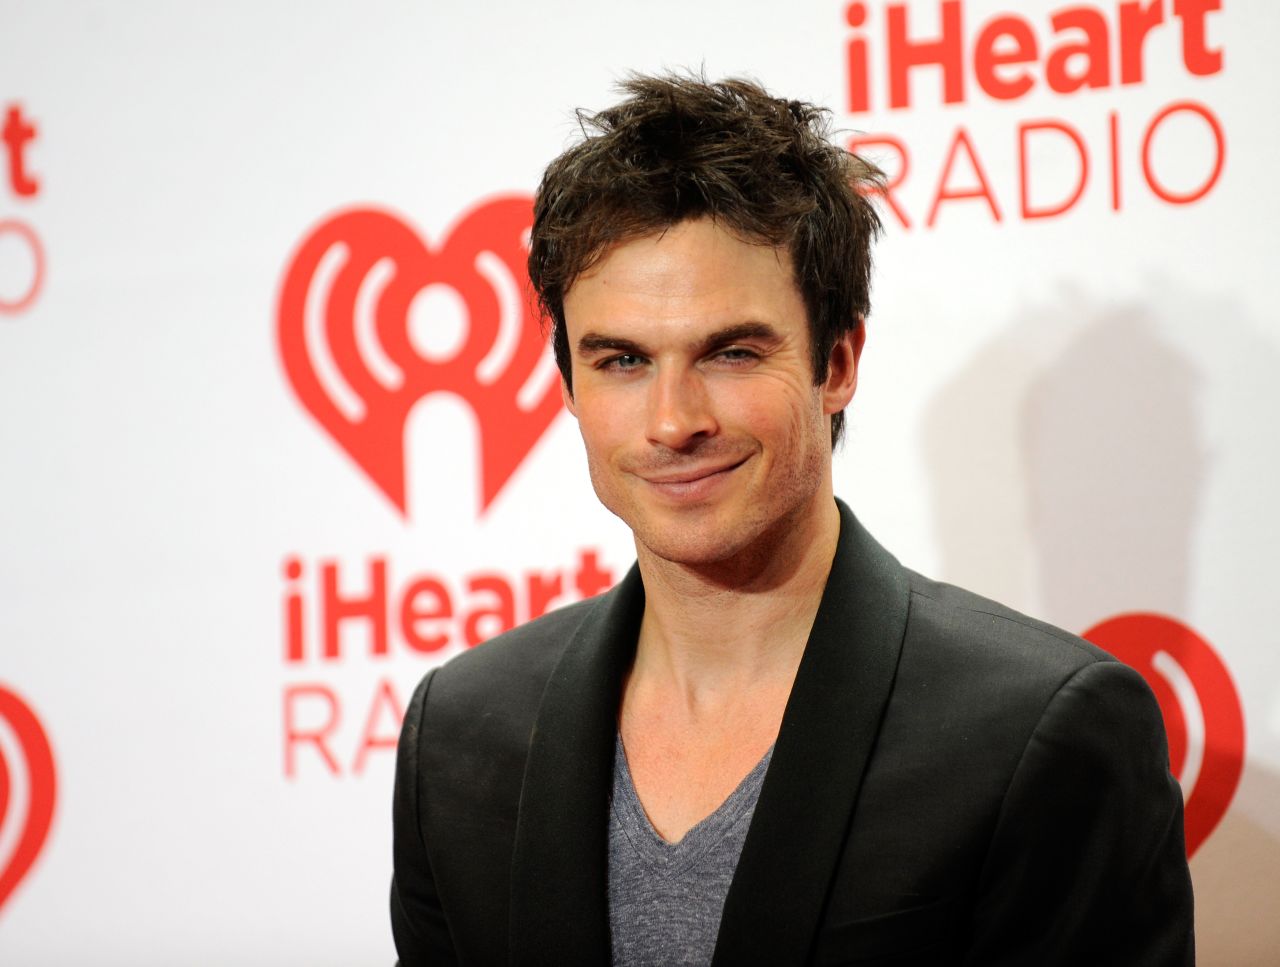 The devilish look of Ian Somerhalder has served him well on the TV series "The Vampire Diaries." He could bring that to the role.